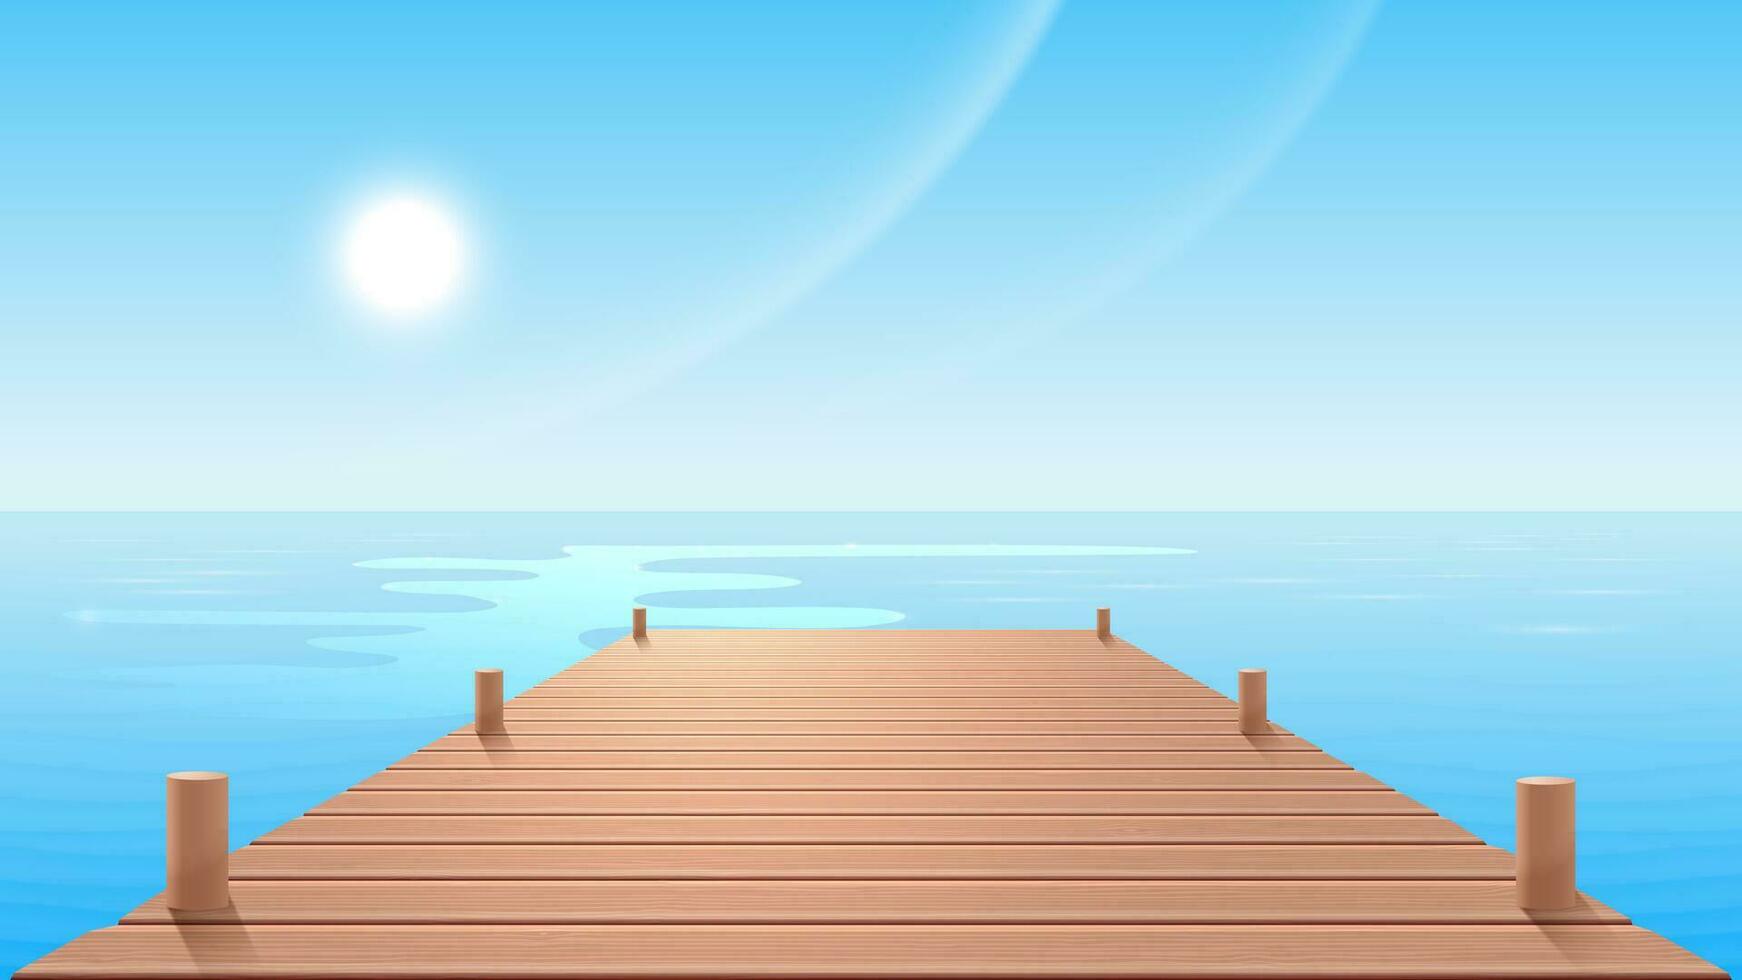 A wooden pier or deck extending into the sea or ocean to the sunlit skyline. Vector illustration.